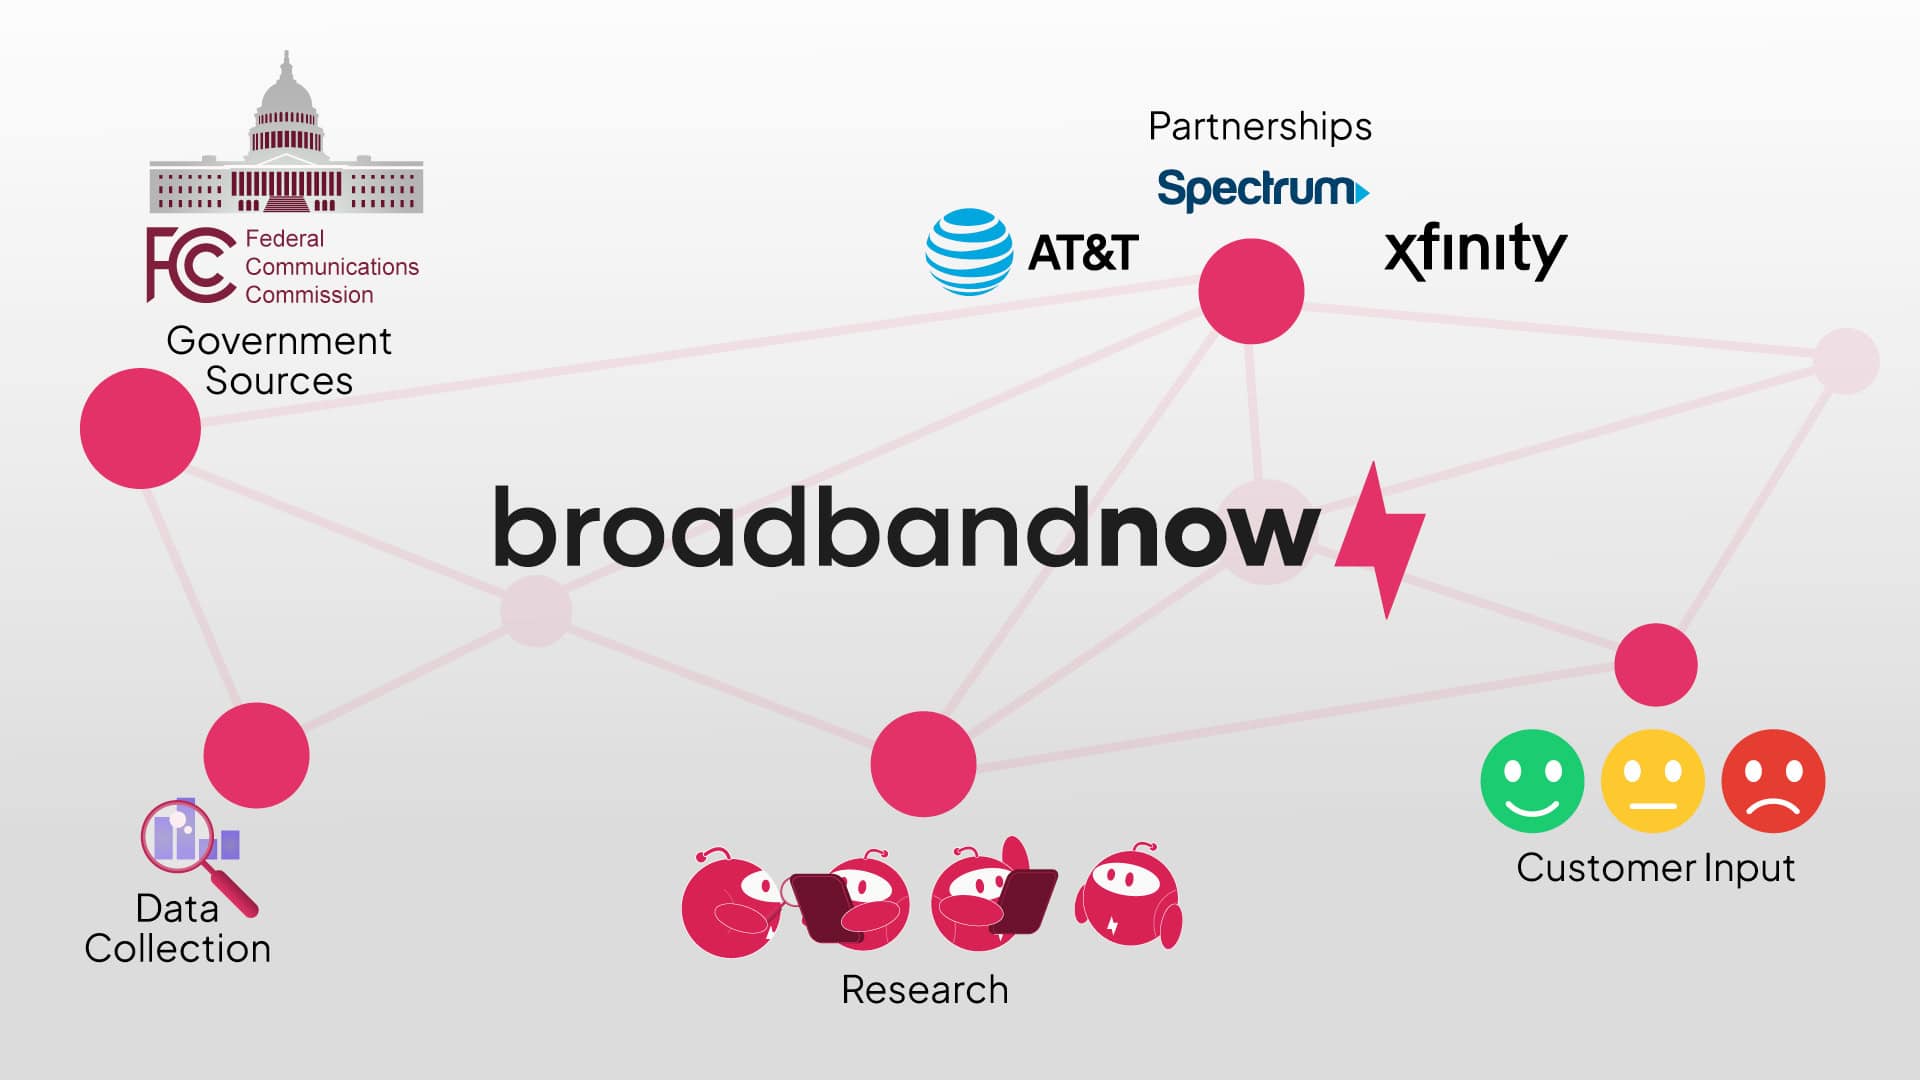 raphic showing sources of BroadbandNow data, including government sources, data collection, partnerships, customer input, and research